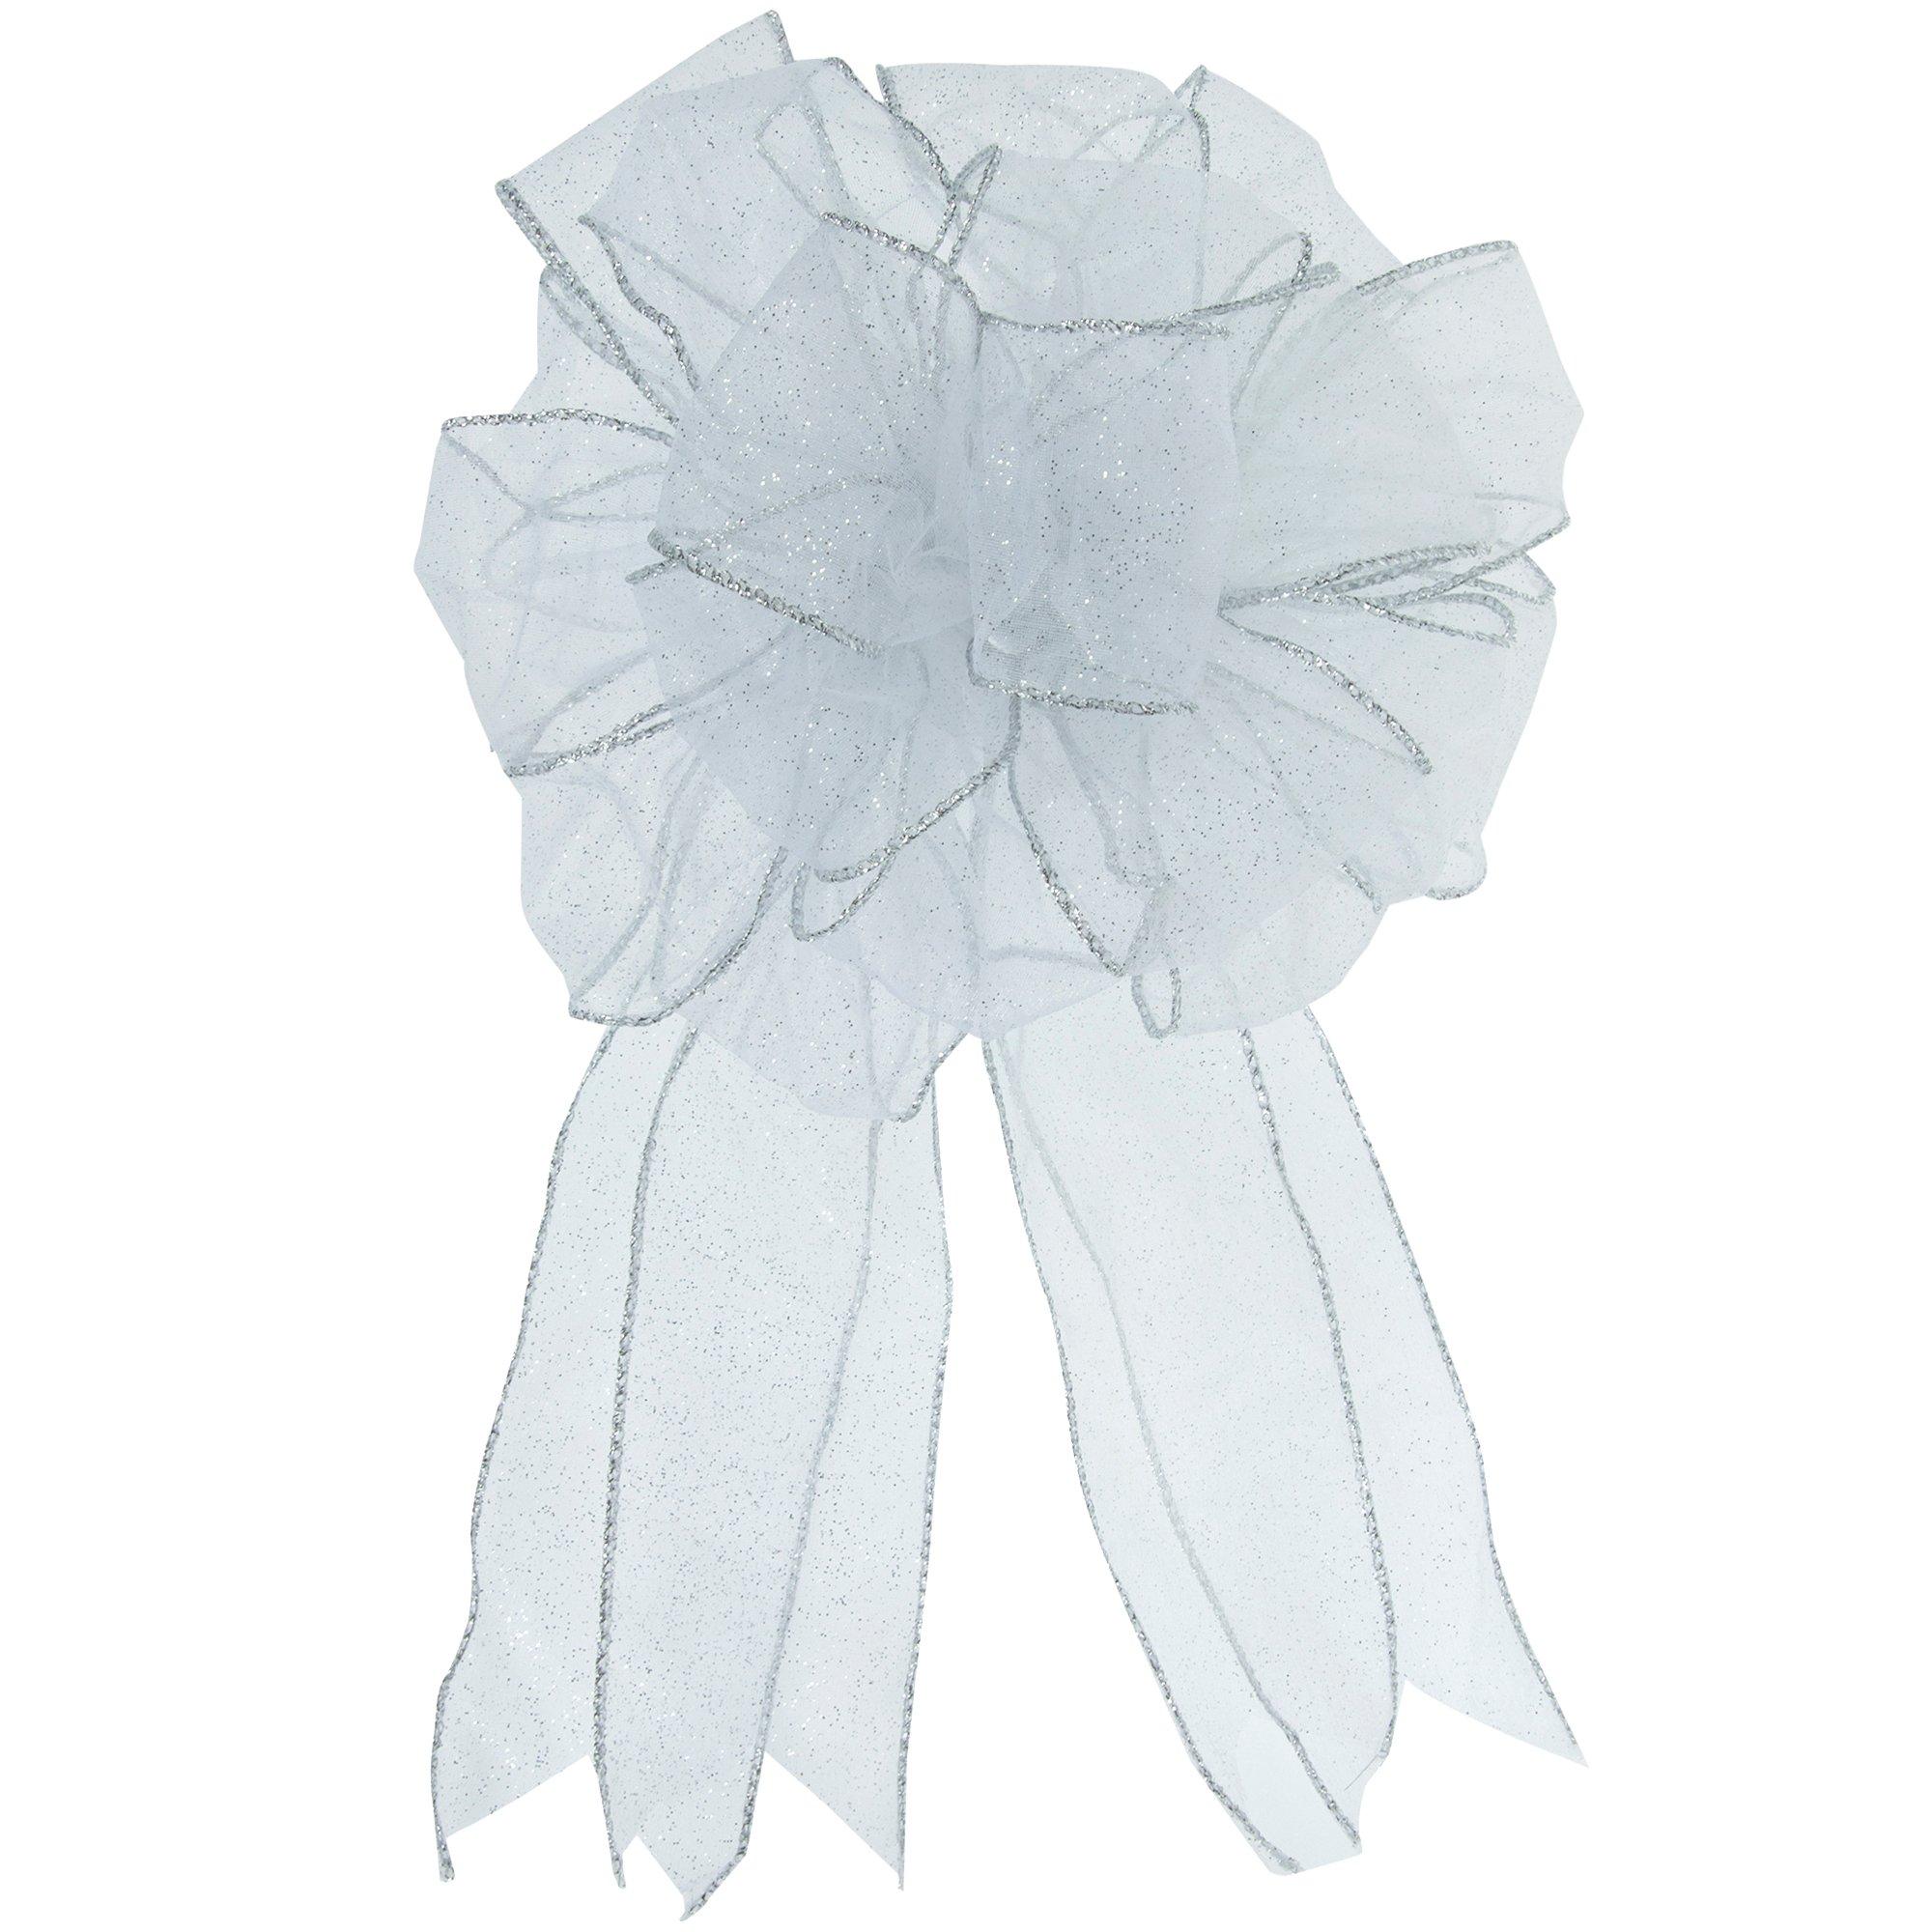 Wedding Bows - Pew Bows - Wired Mystic White Lace Bows 6 Inch